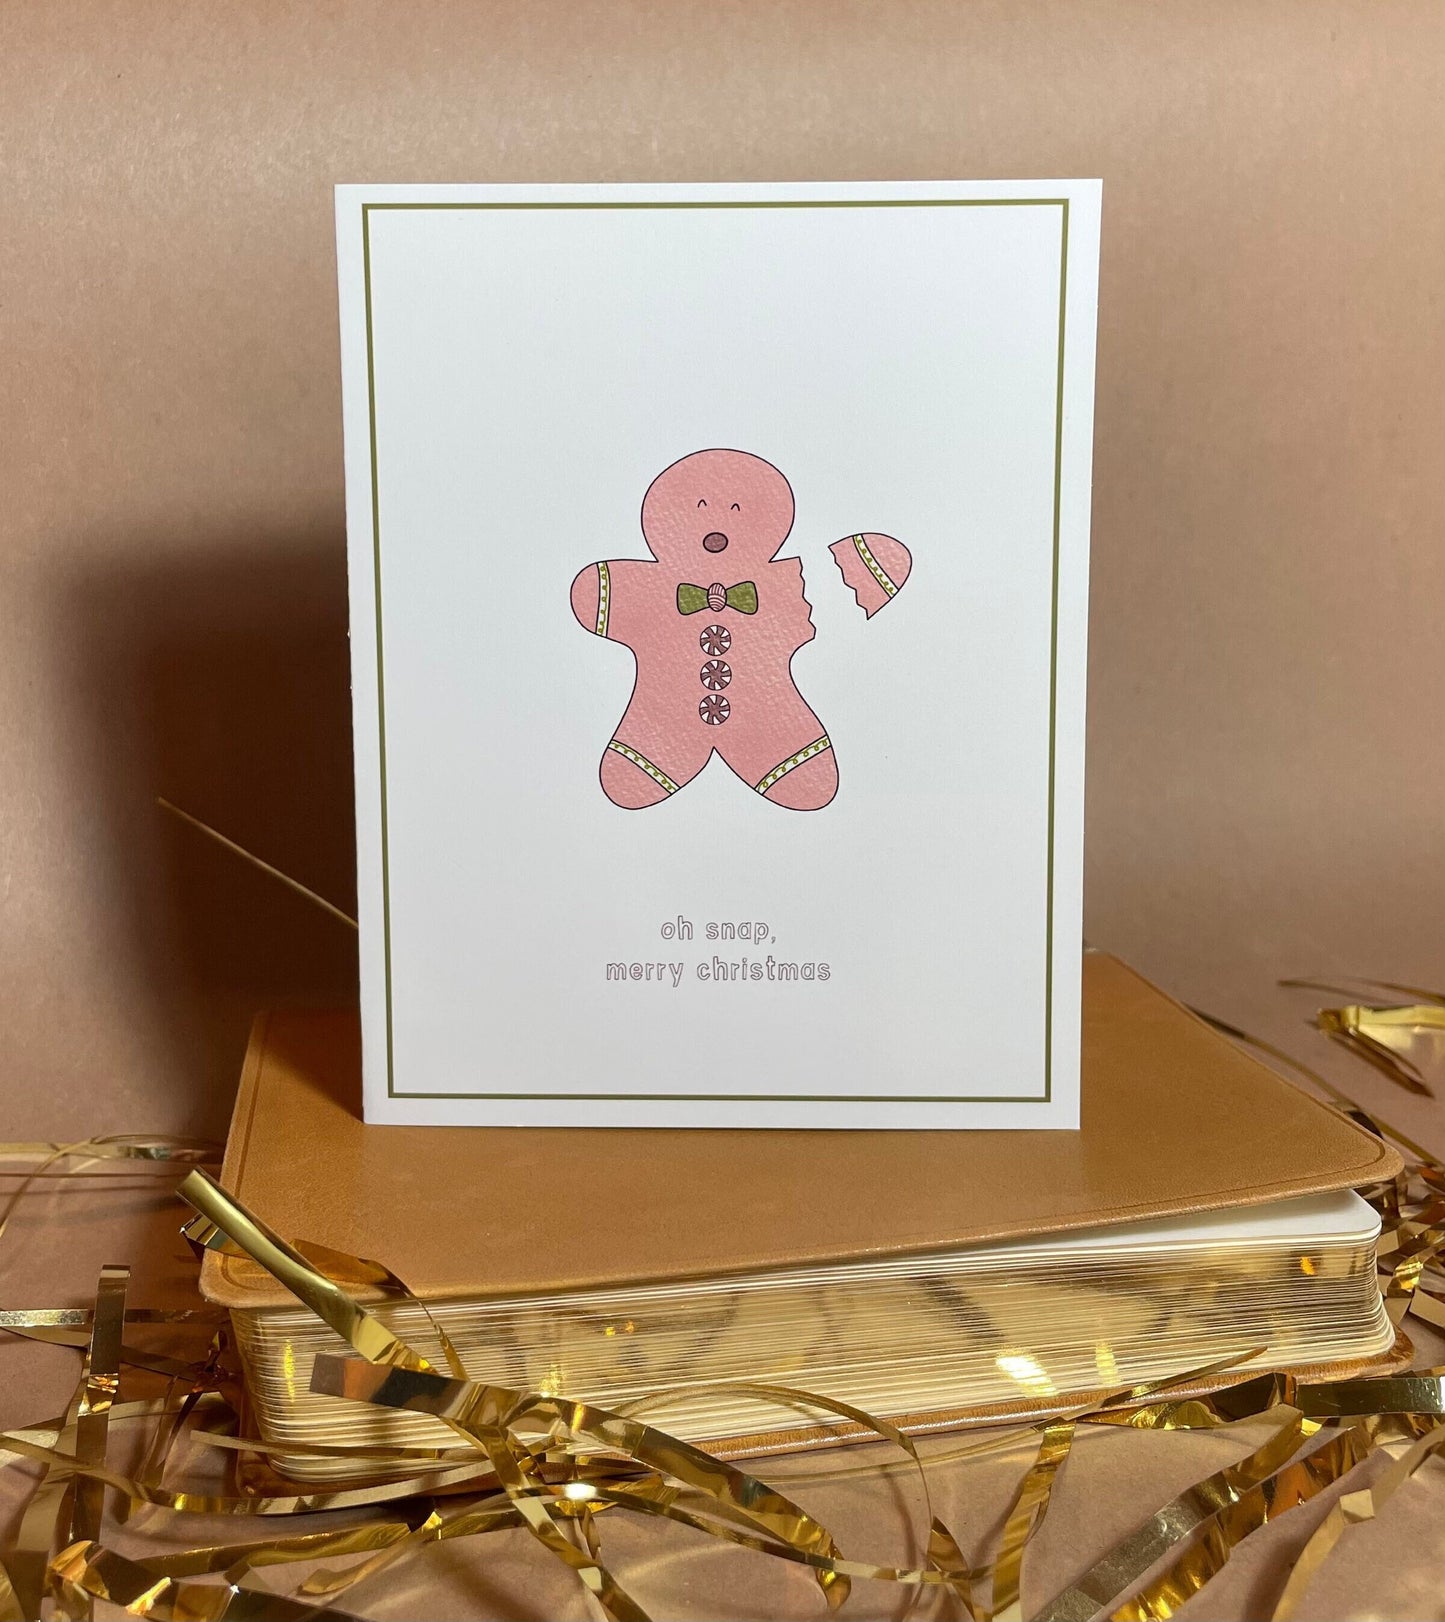 white greeting card with a green border and a little pink gingerbread man with his arm snapping off and the text saying "oh snap, merry christmas